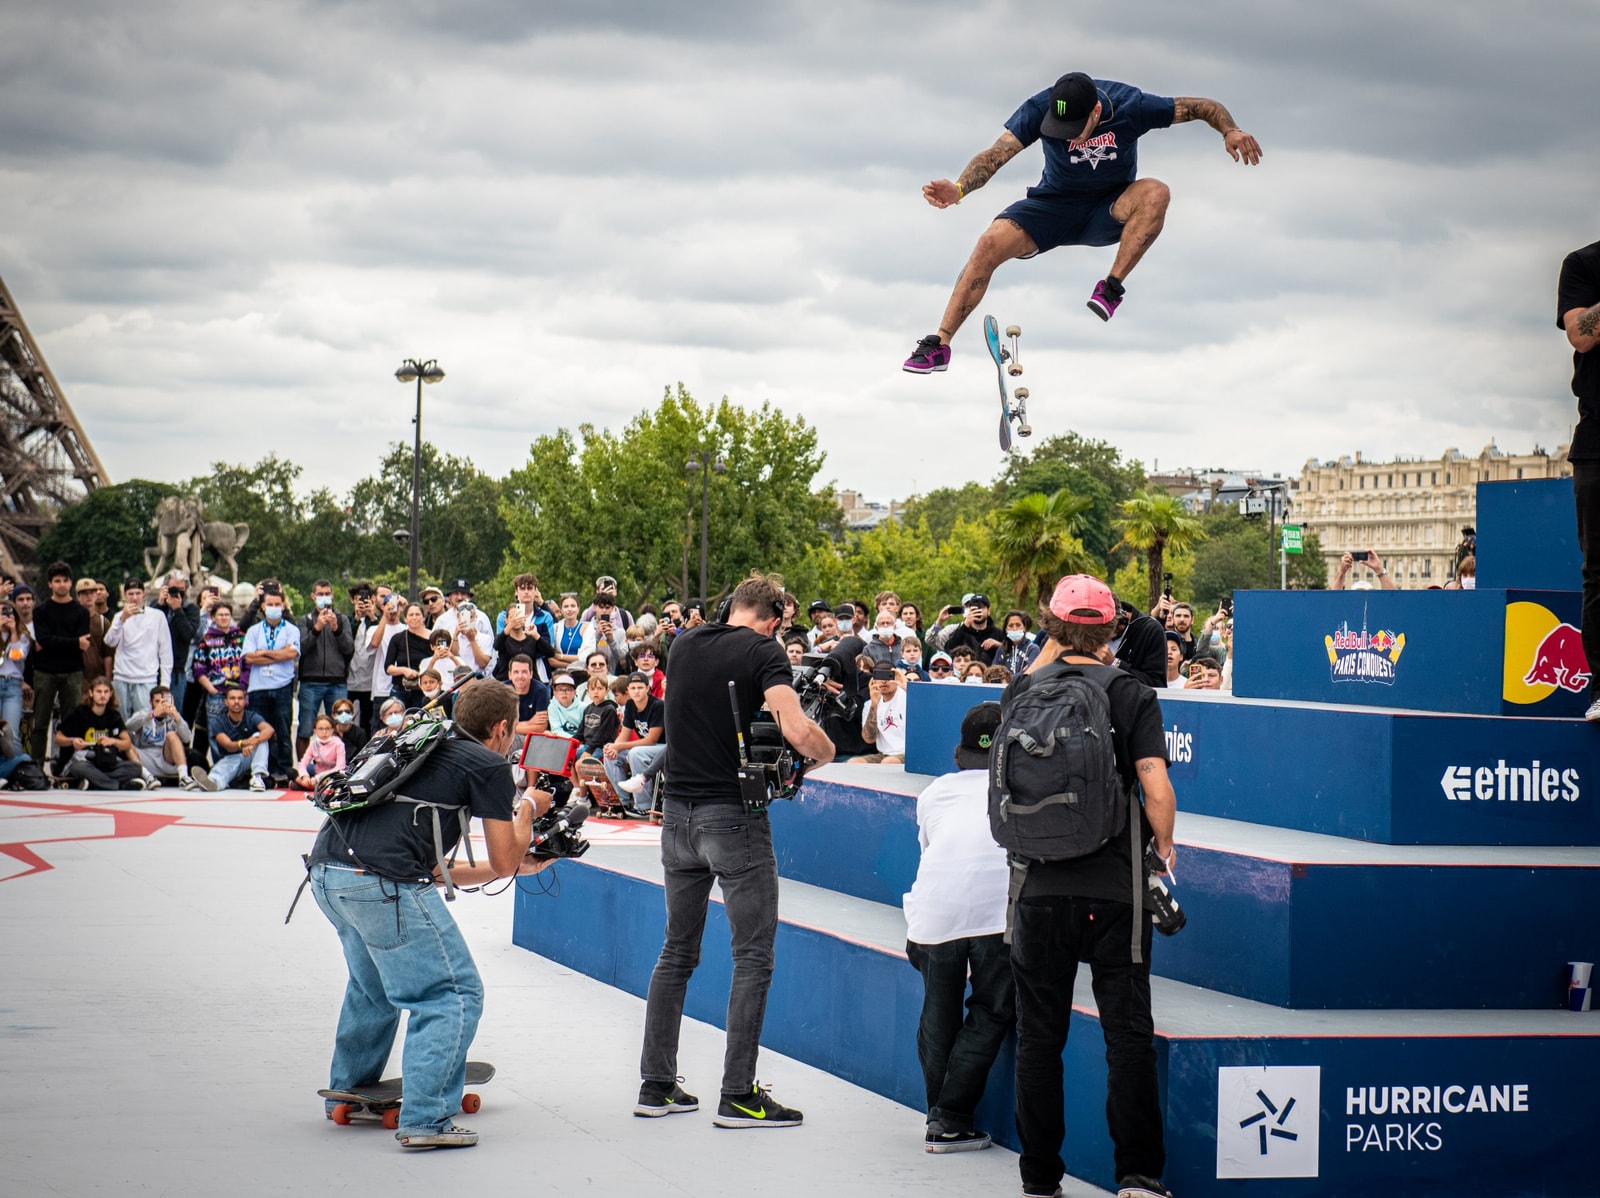 Trevor McClung and Leticia Bufoni Take Top Honors At Red Bull's 'Paris Conquest'